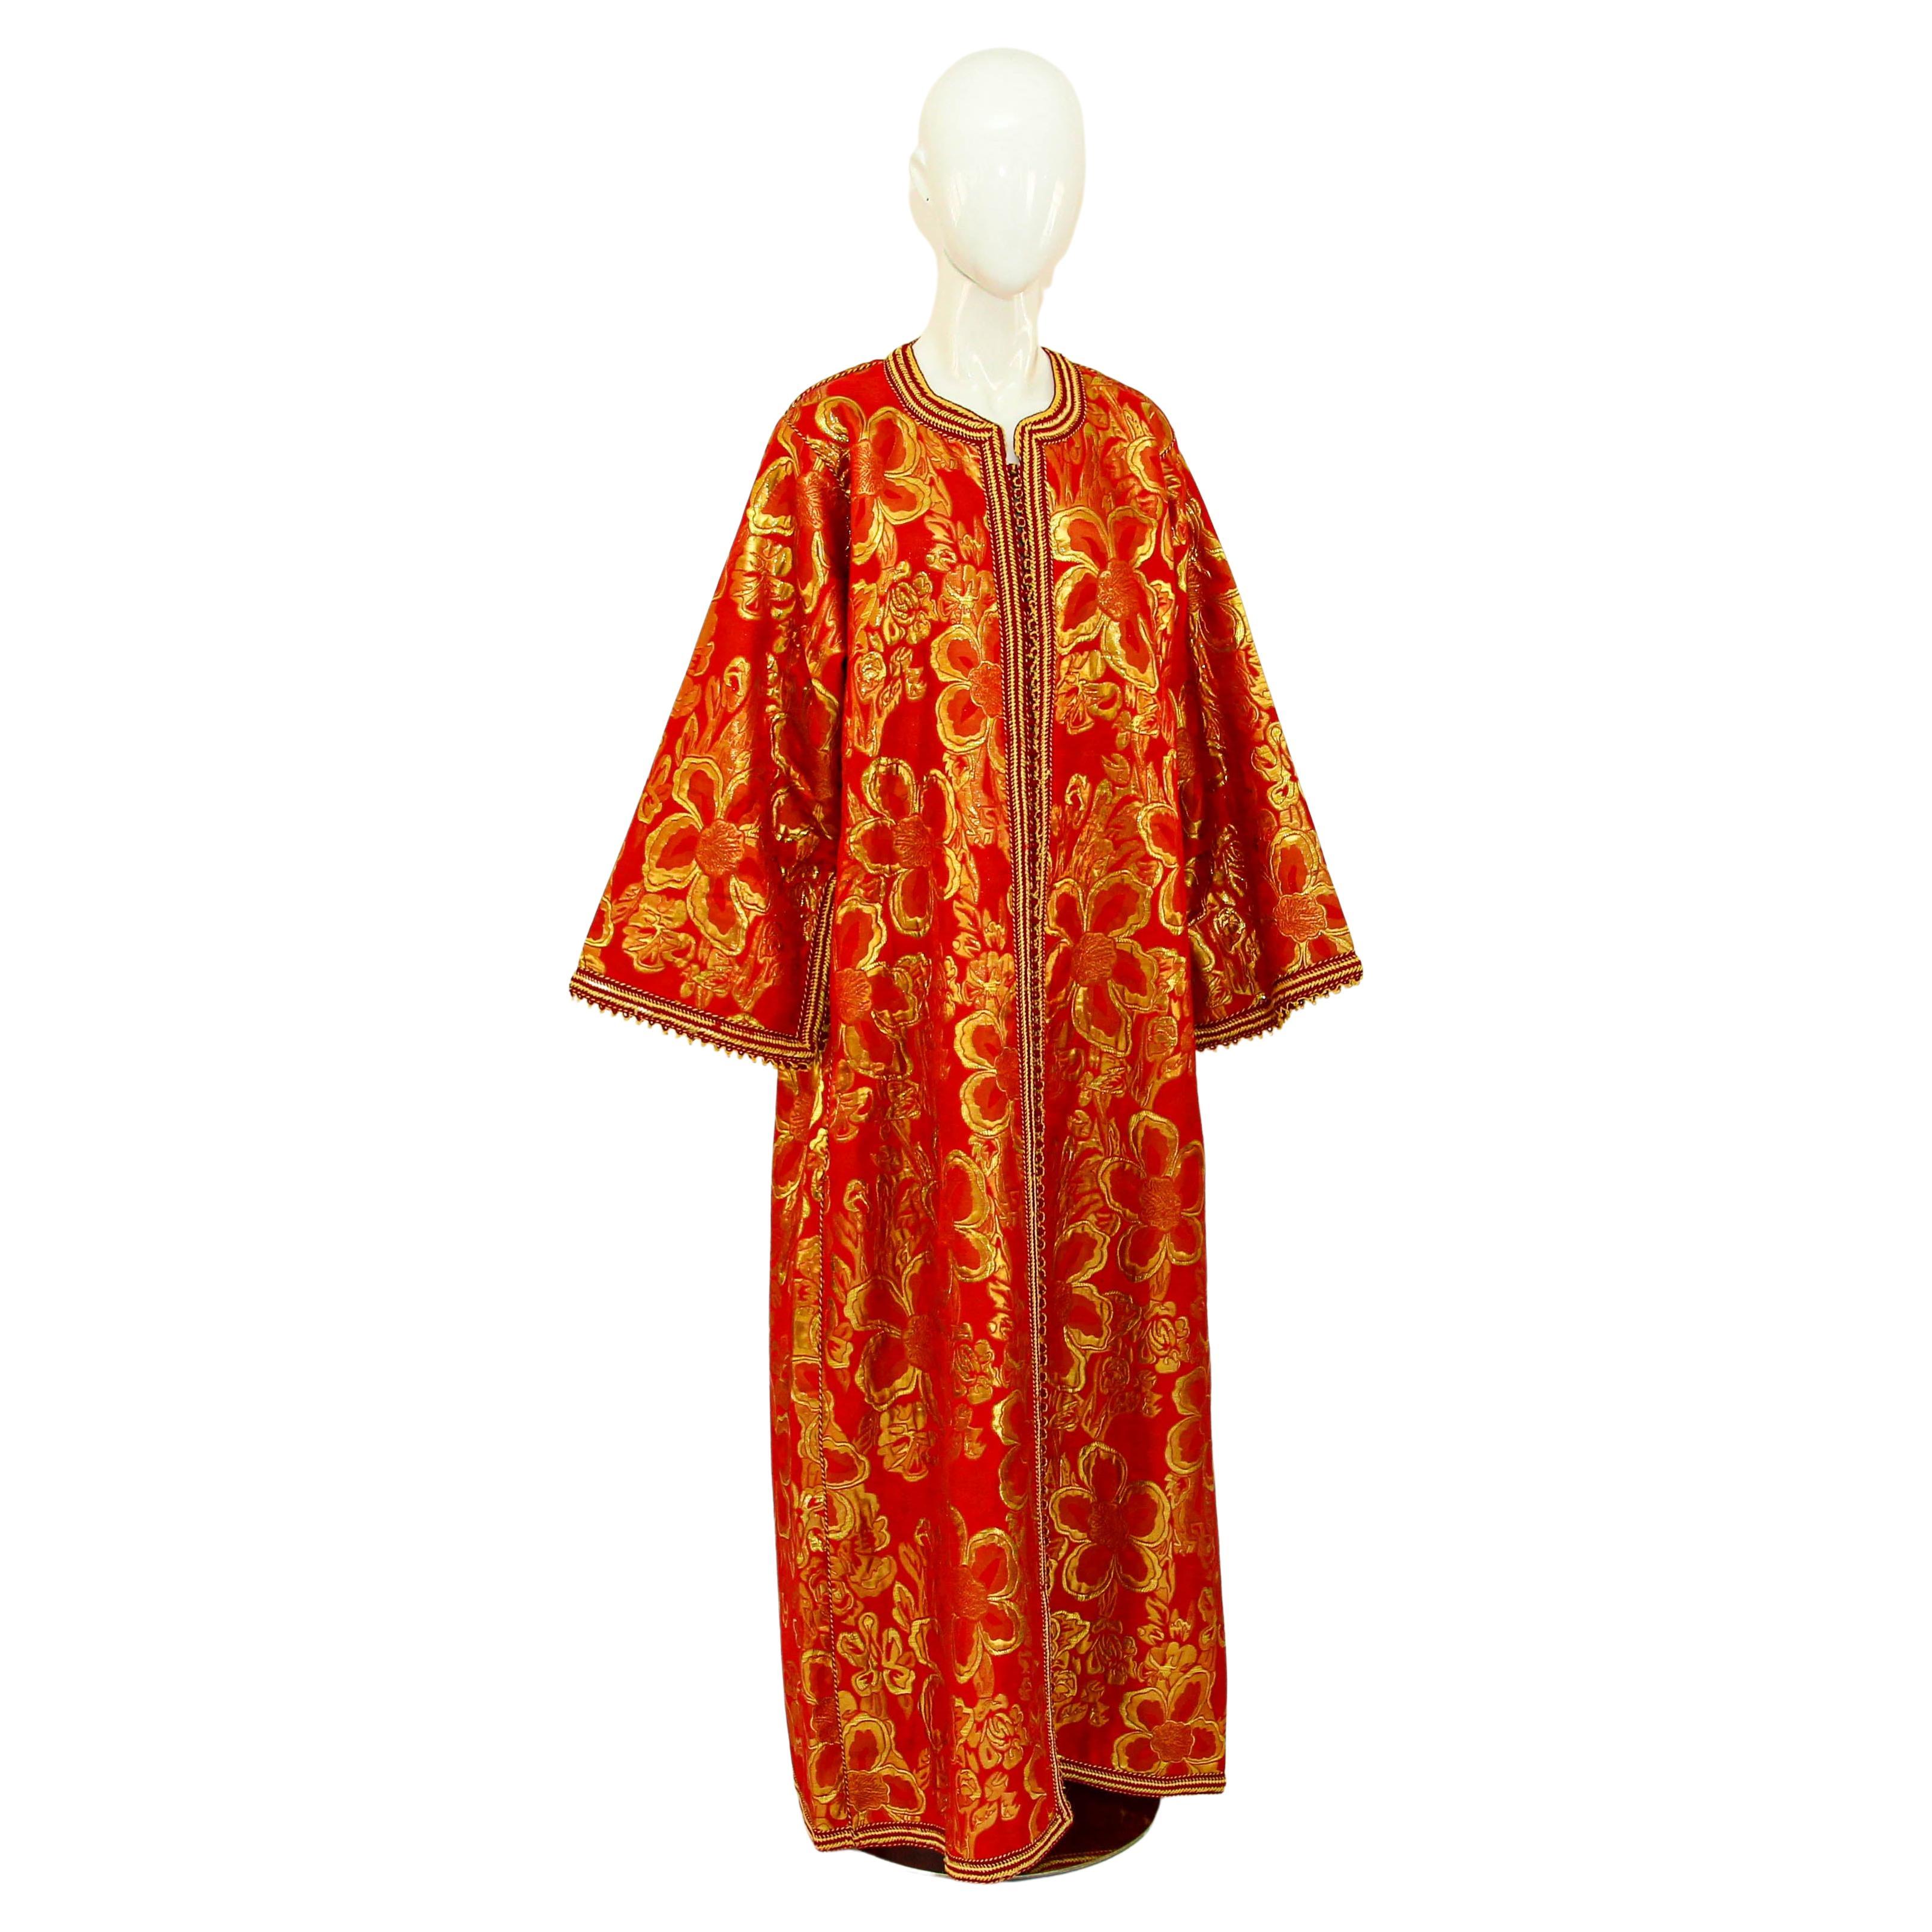 1970s Vintage Moroccan Kaftan Red and Gold Brocade Caftan Maxi Dress For Sale